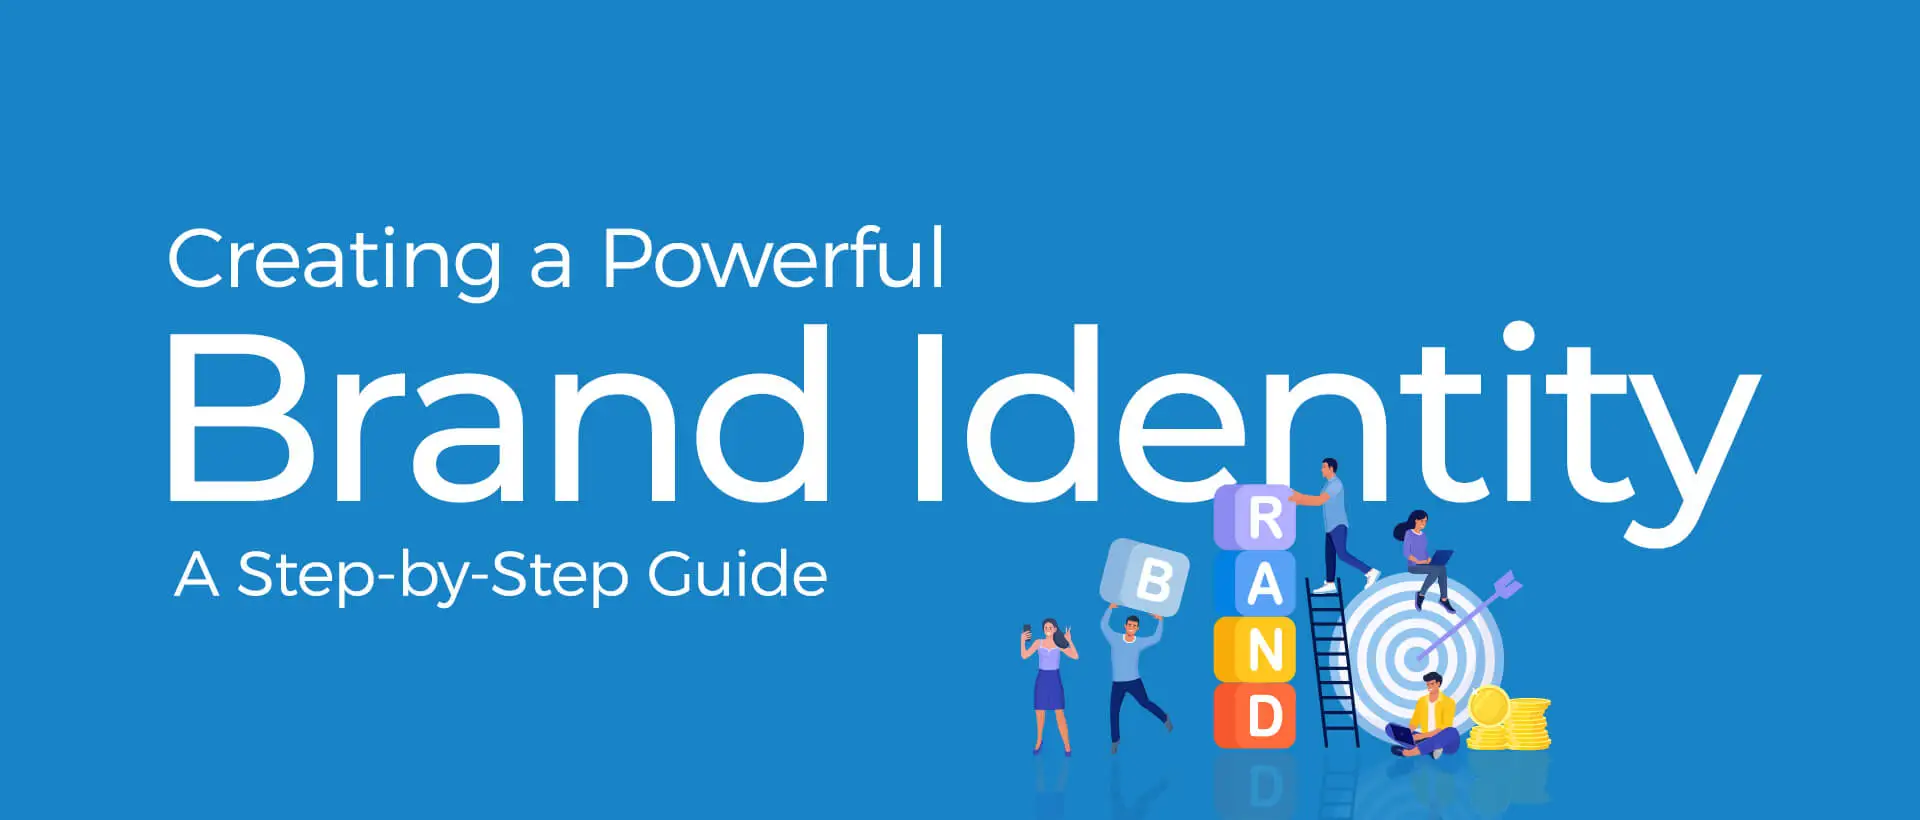 Creating a Powerful Brand Identity: A Step-by-Step Guide